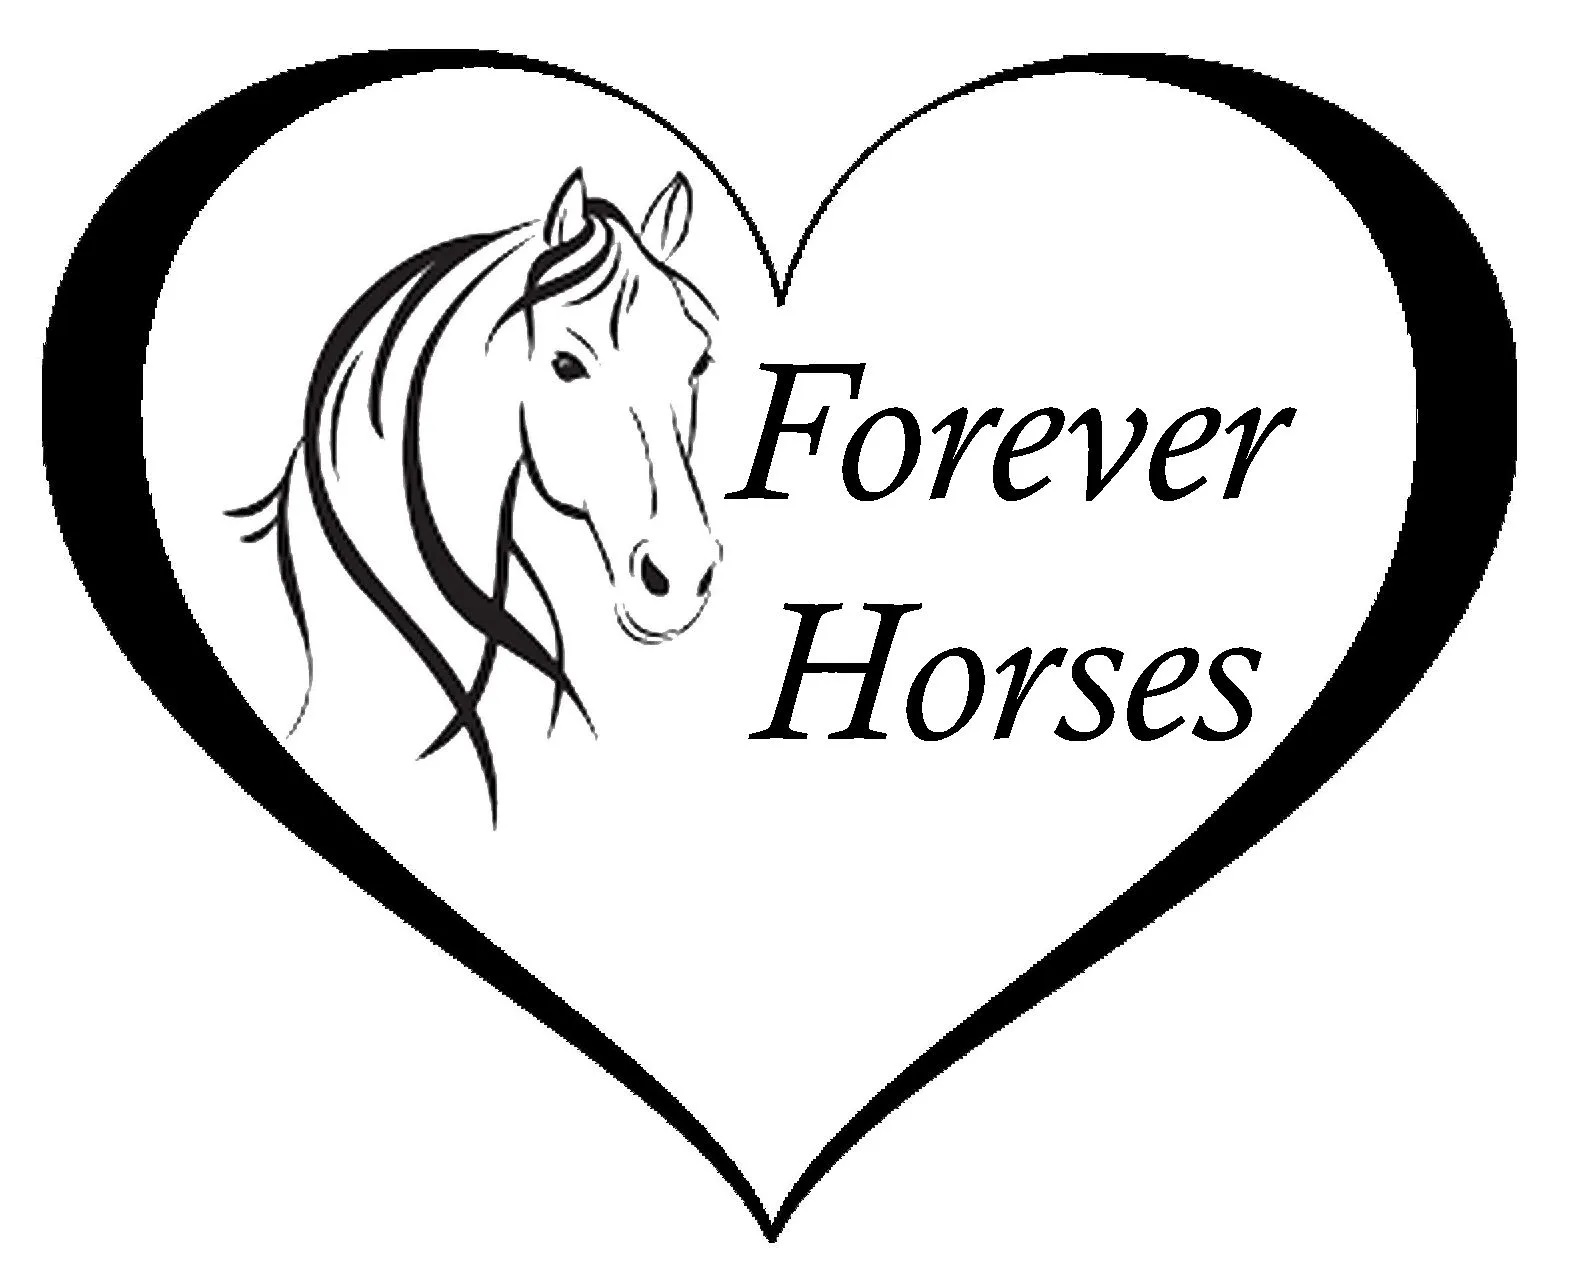 Forever Horses – Session 5 Off To A Great Start!